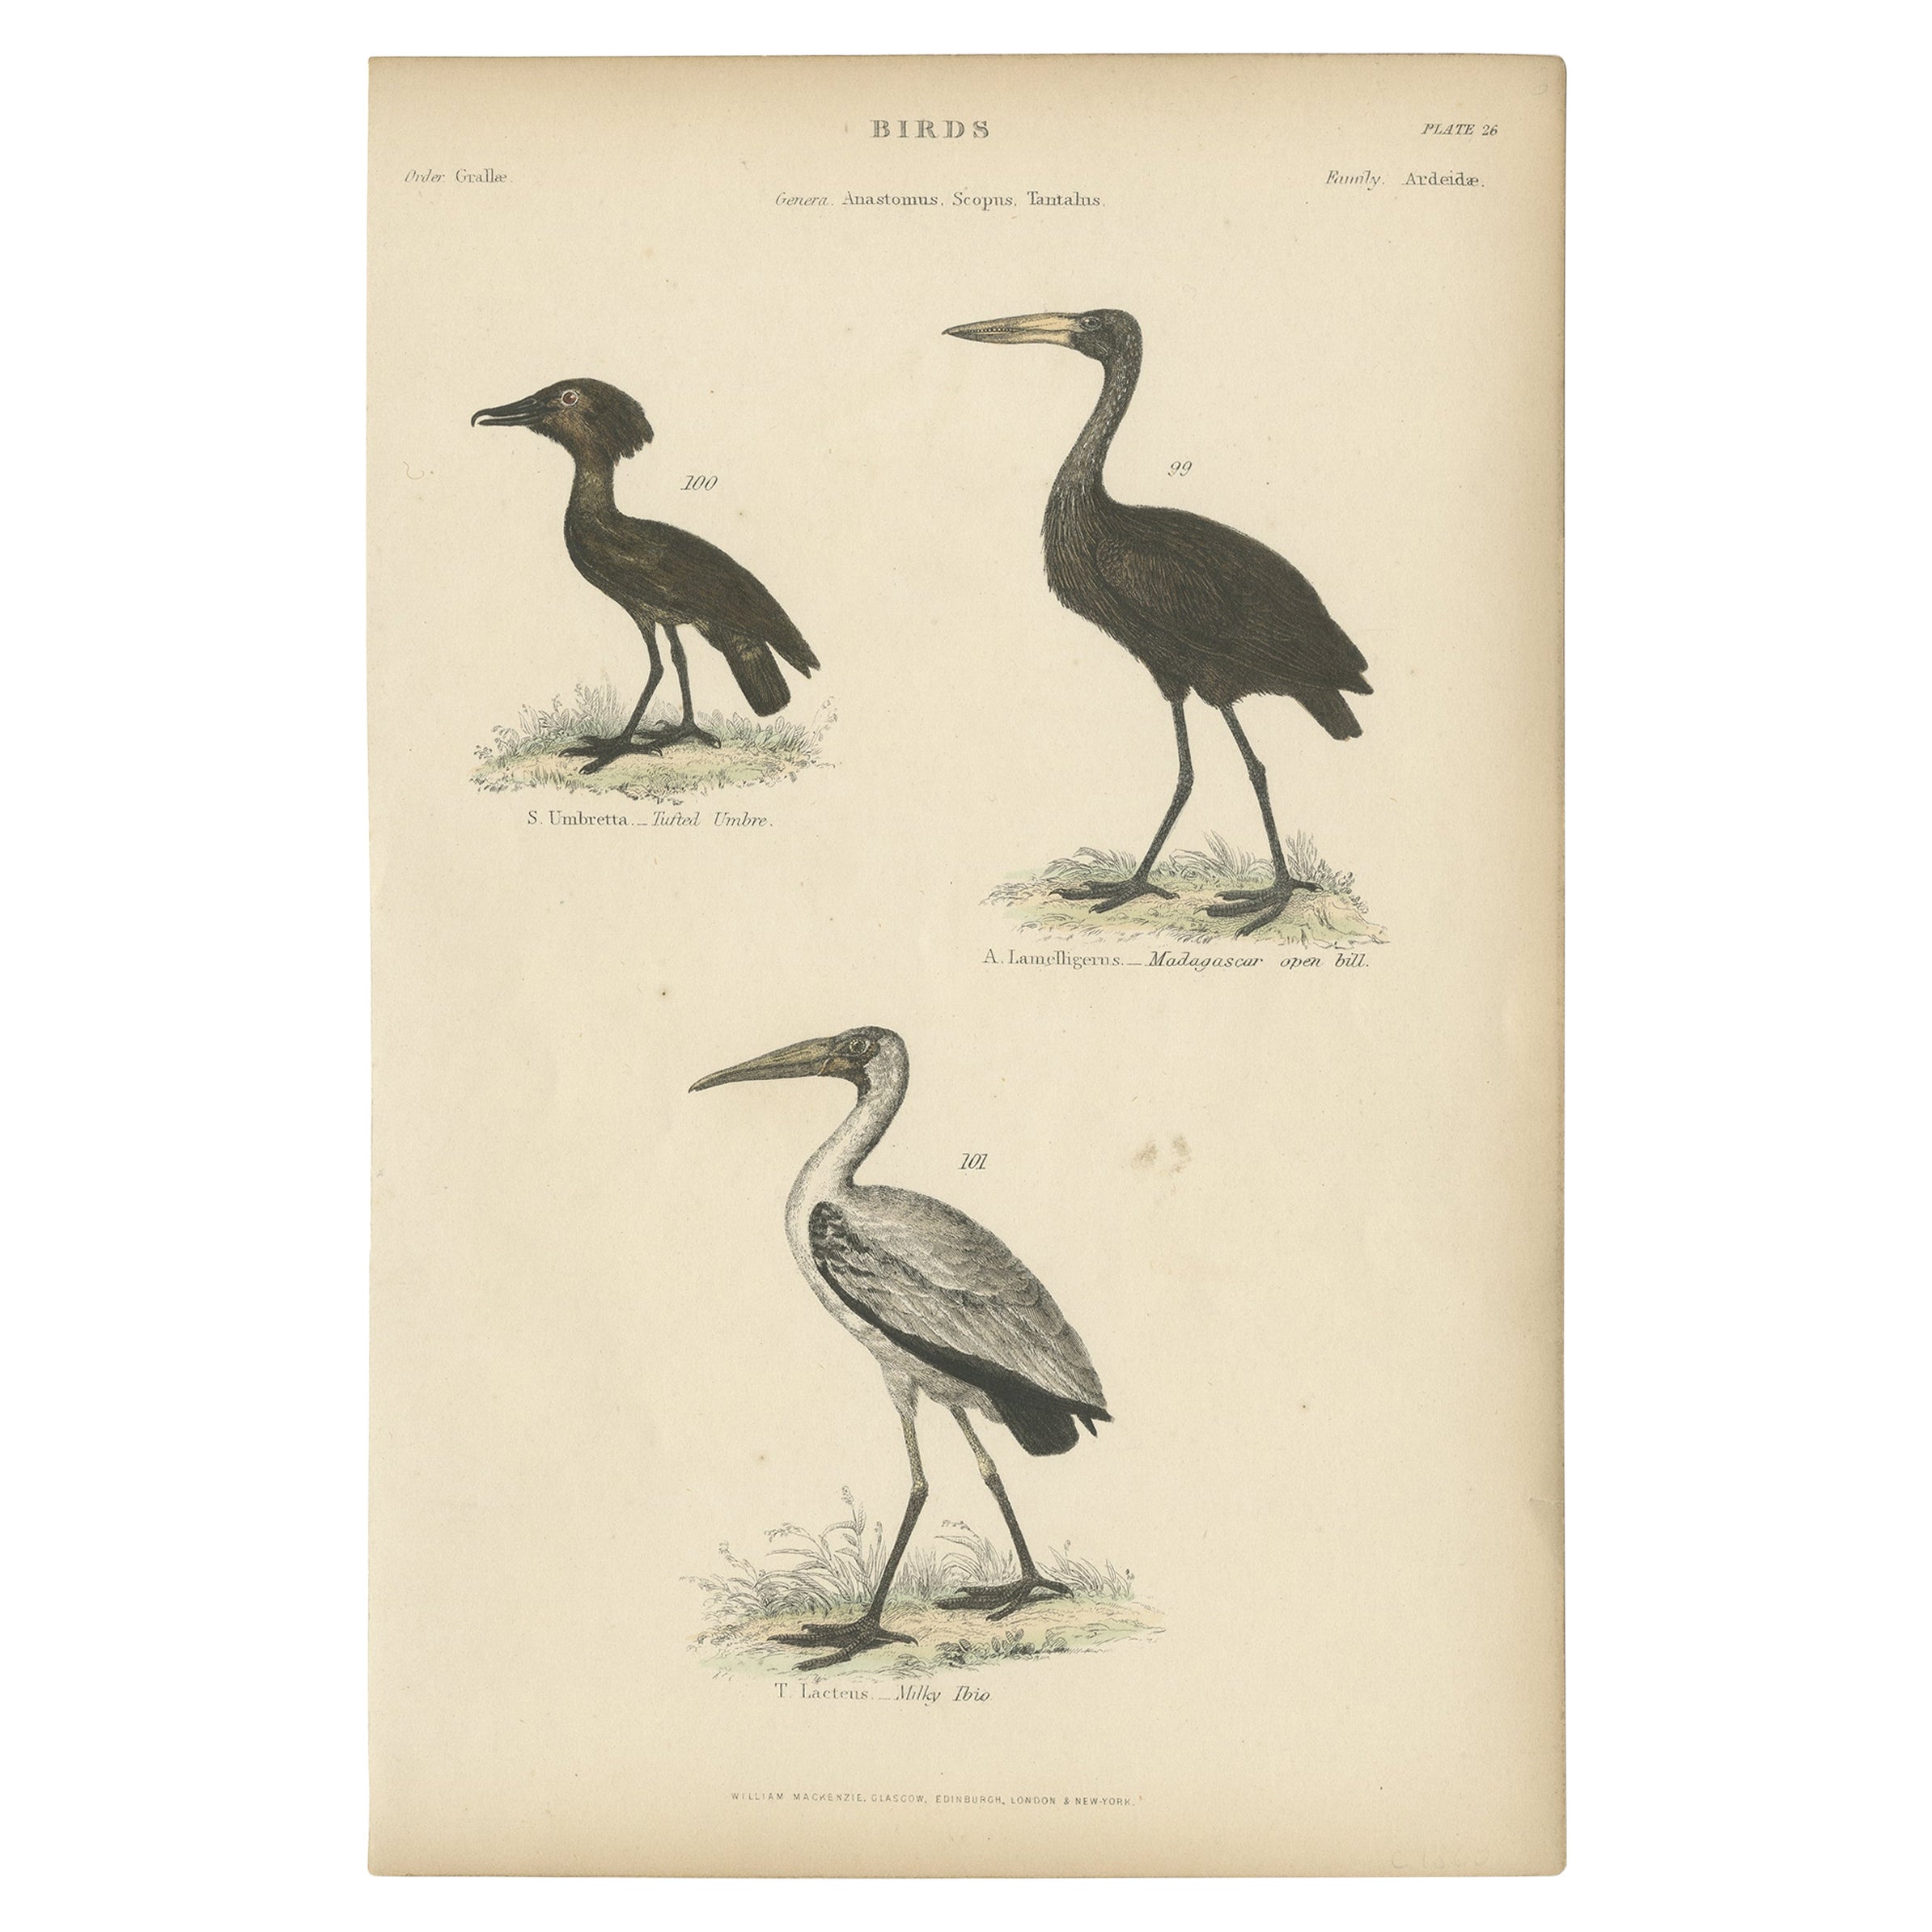 Old Bird Print of The Tufted Umbre, Madagascar Open Bill and Milky Ibis, c.1860